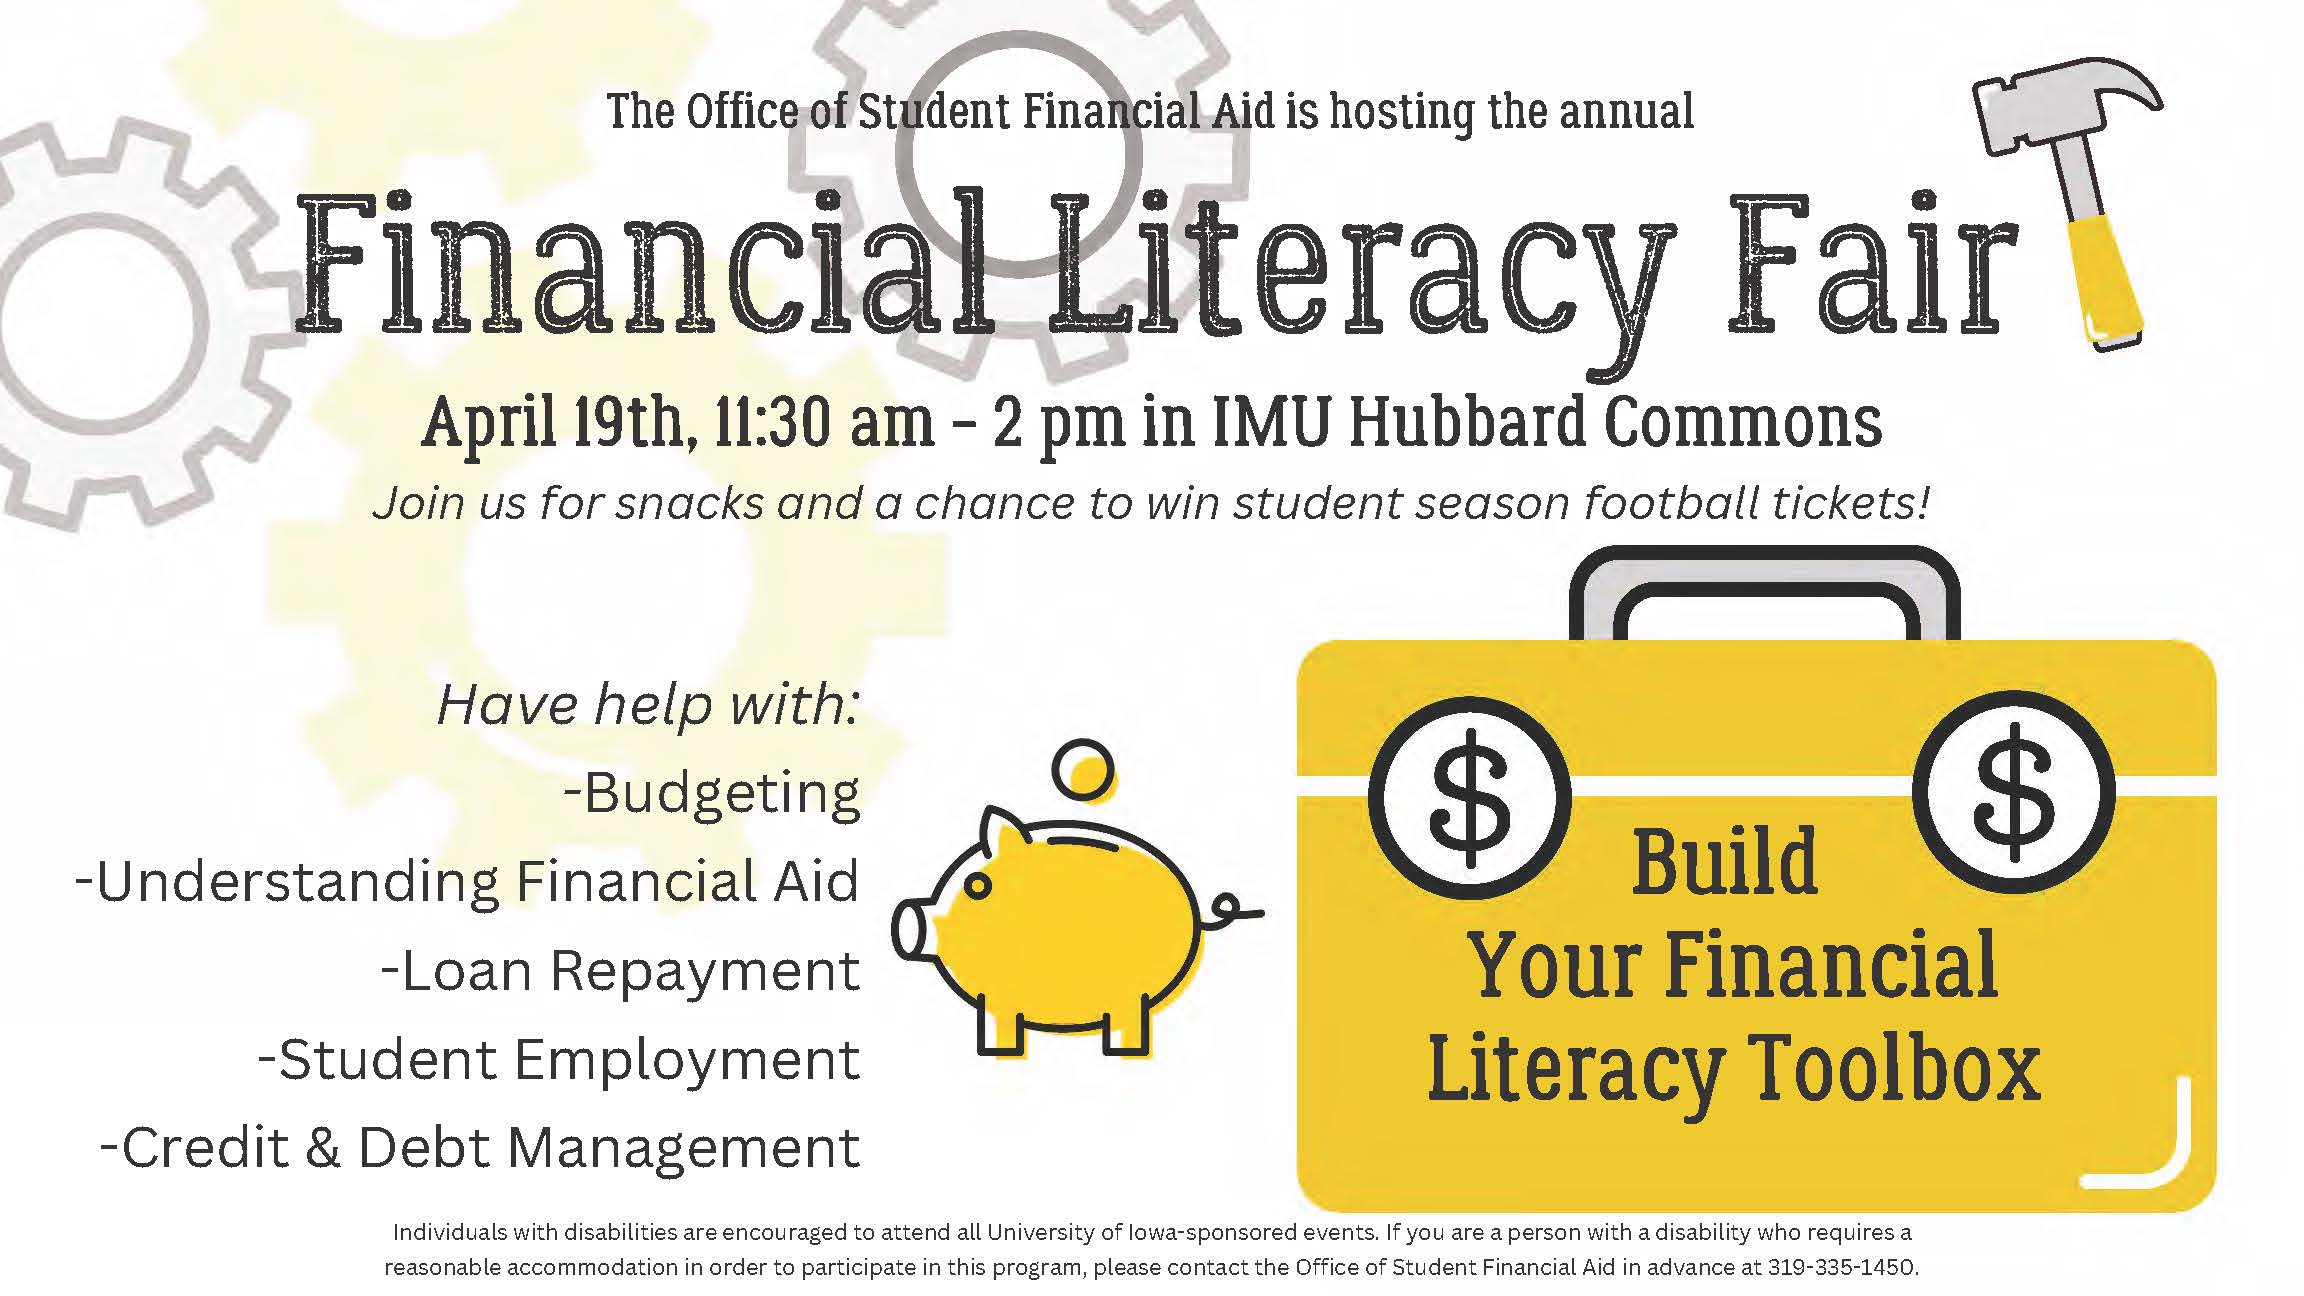 Financial Literacy Fair on April 19 from 11:30 to 2:00 p.m. in Hubbard Commons